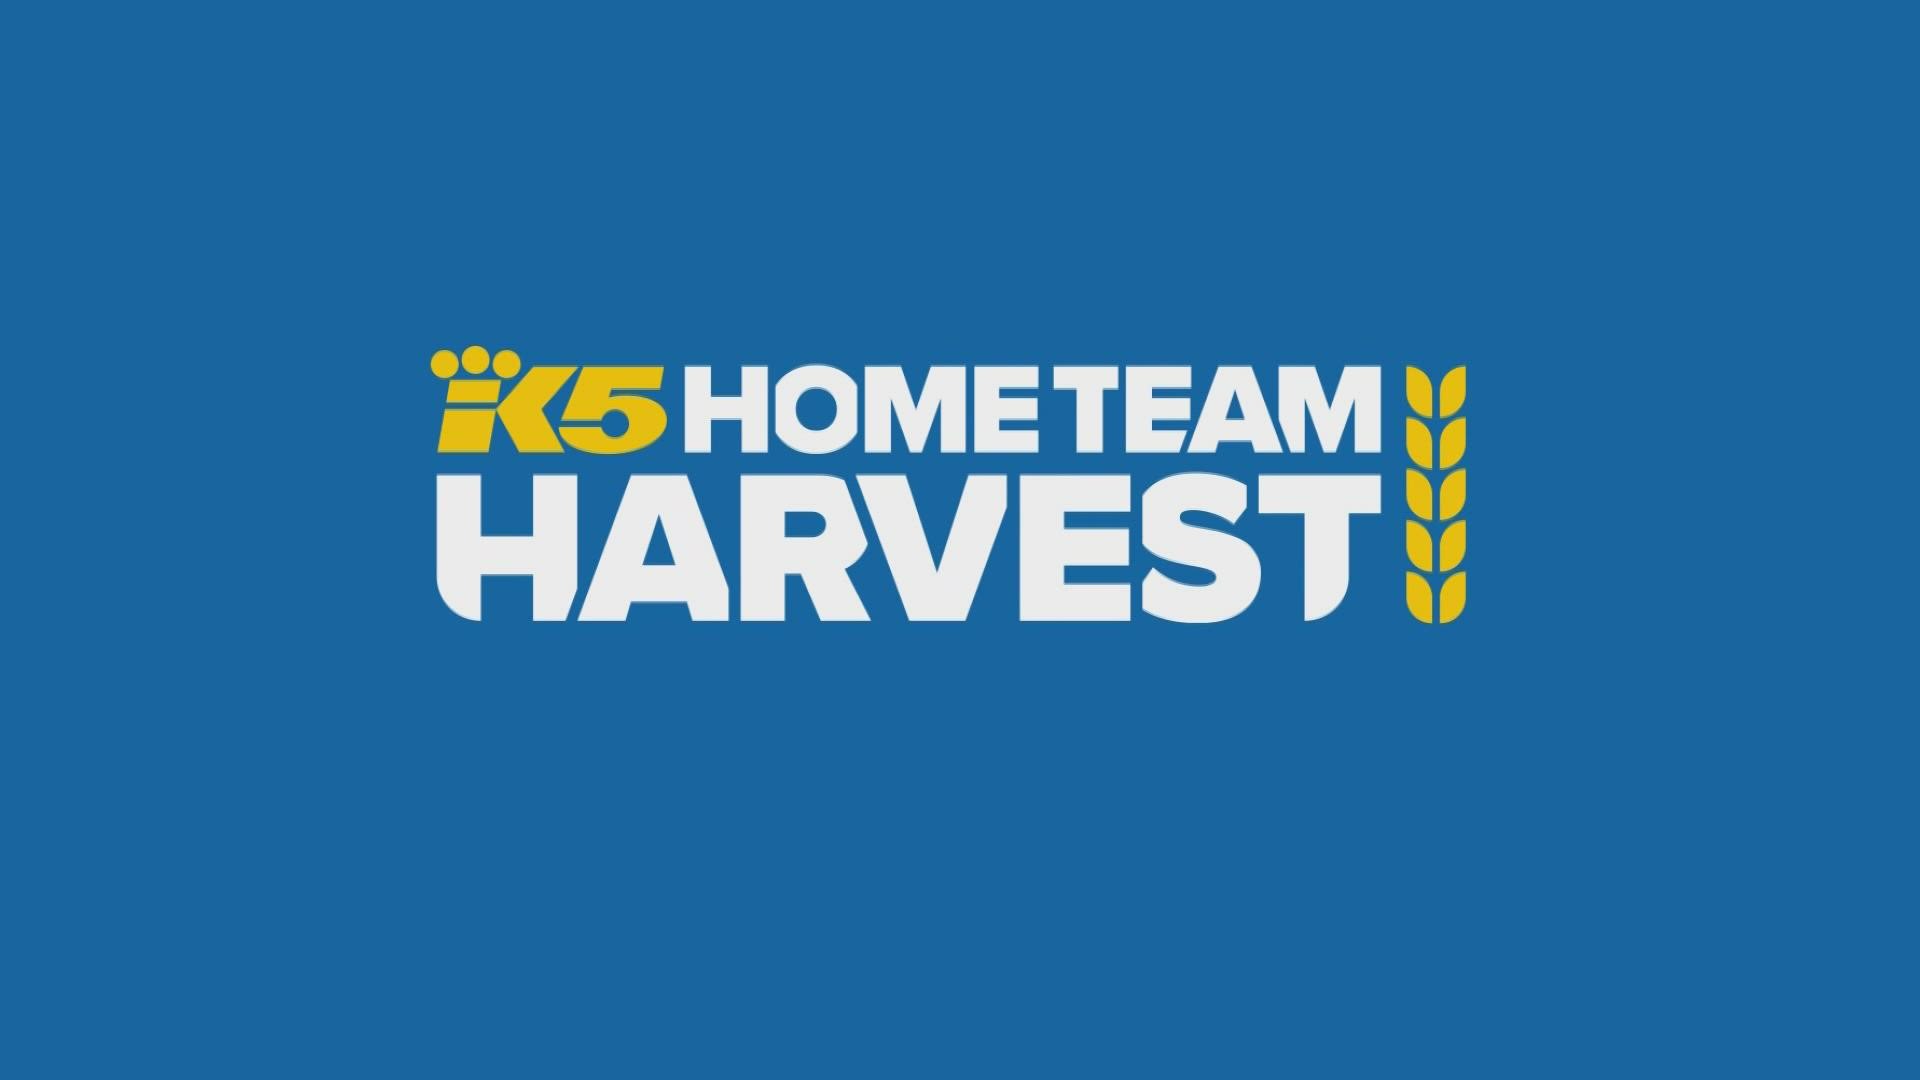 KING 5 needs your help to raise 23 million meals for Home Team Harvest, Washington state’s largest annual food drive.